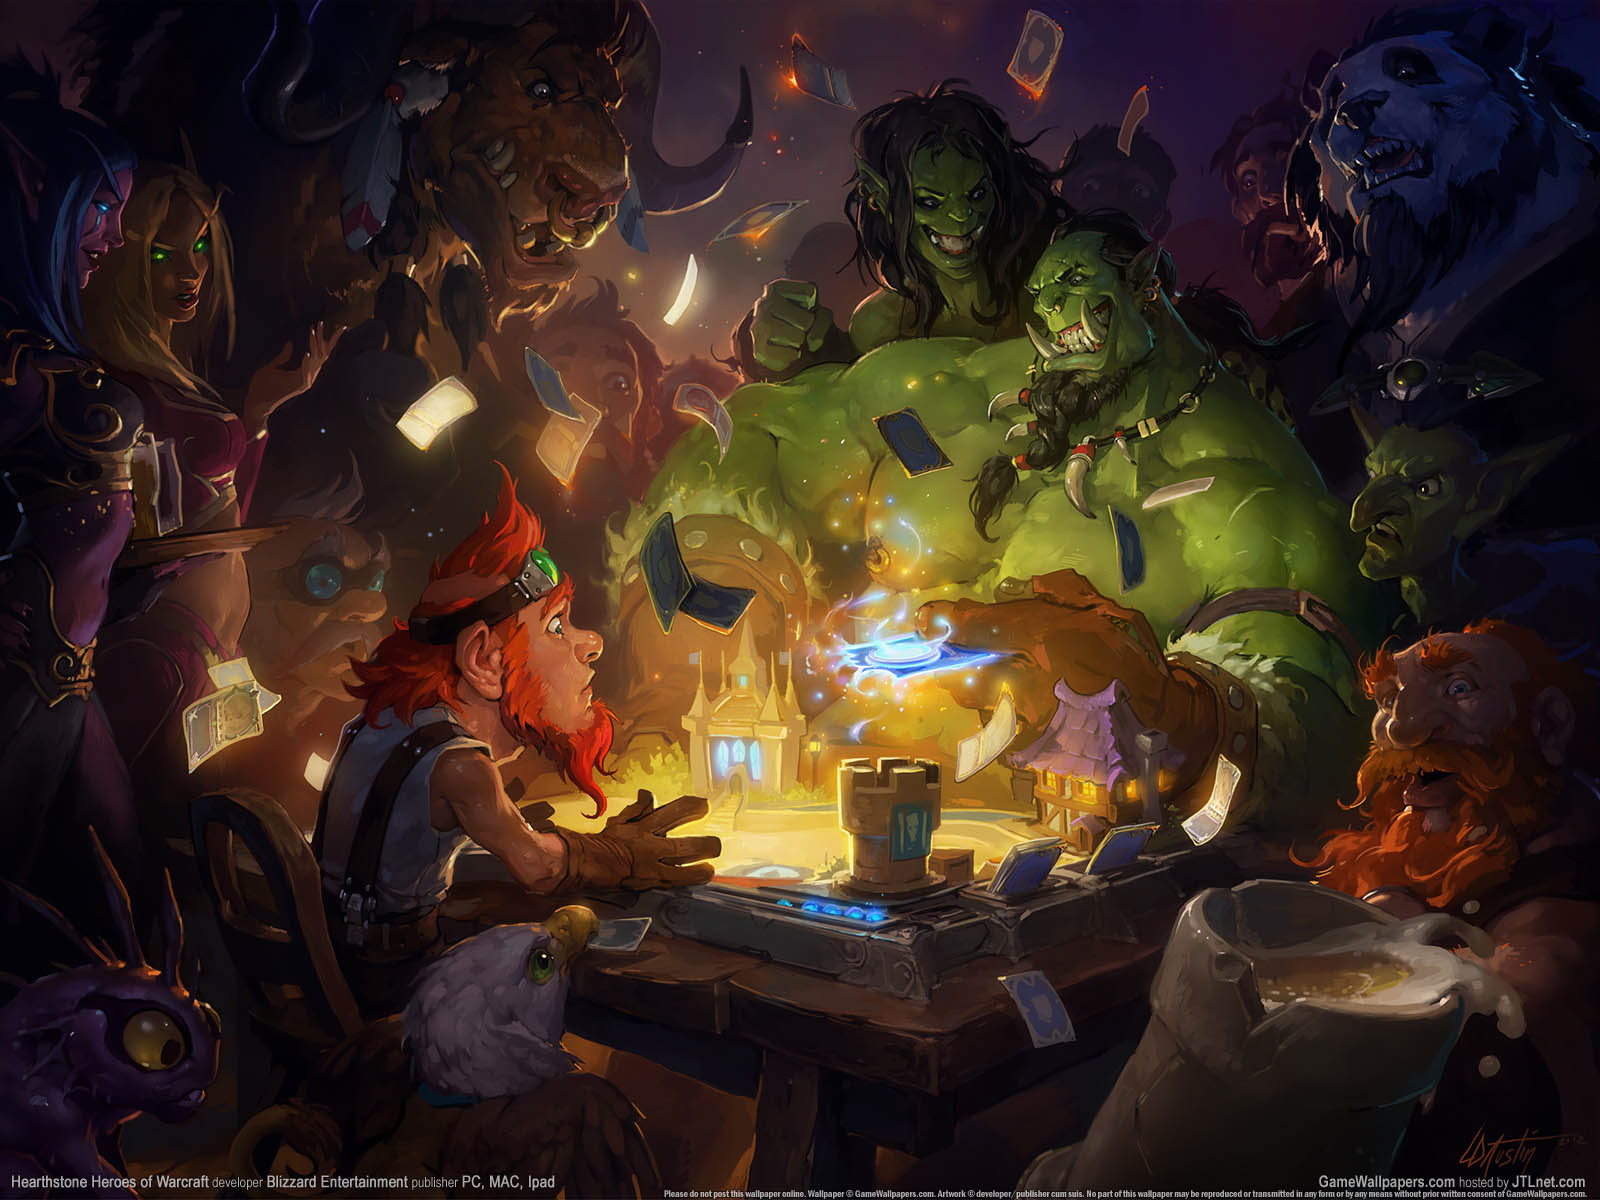 Hearthstone%3A Heroes of Warcraft achtergrond 04 1600x1200